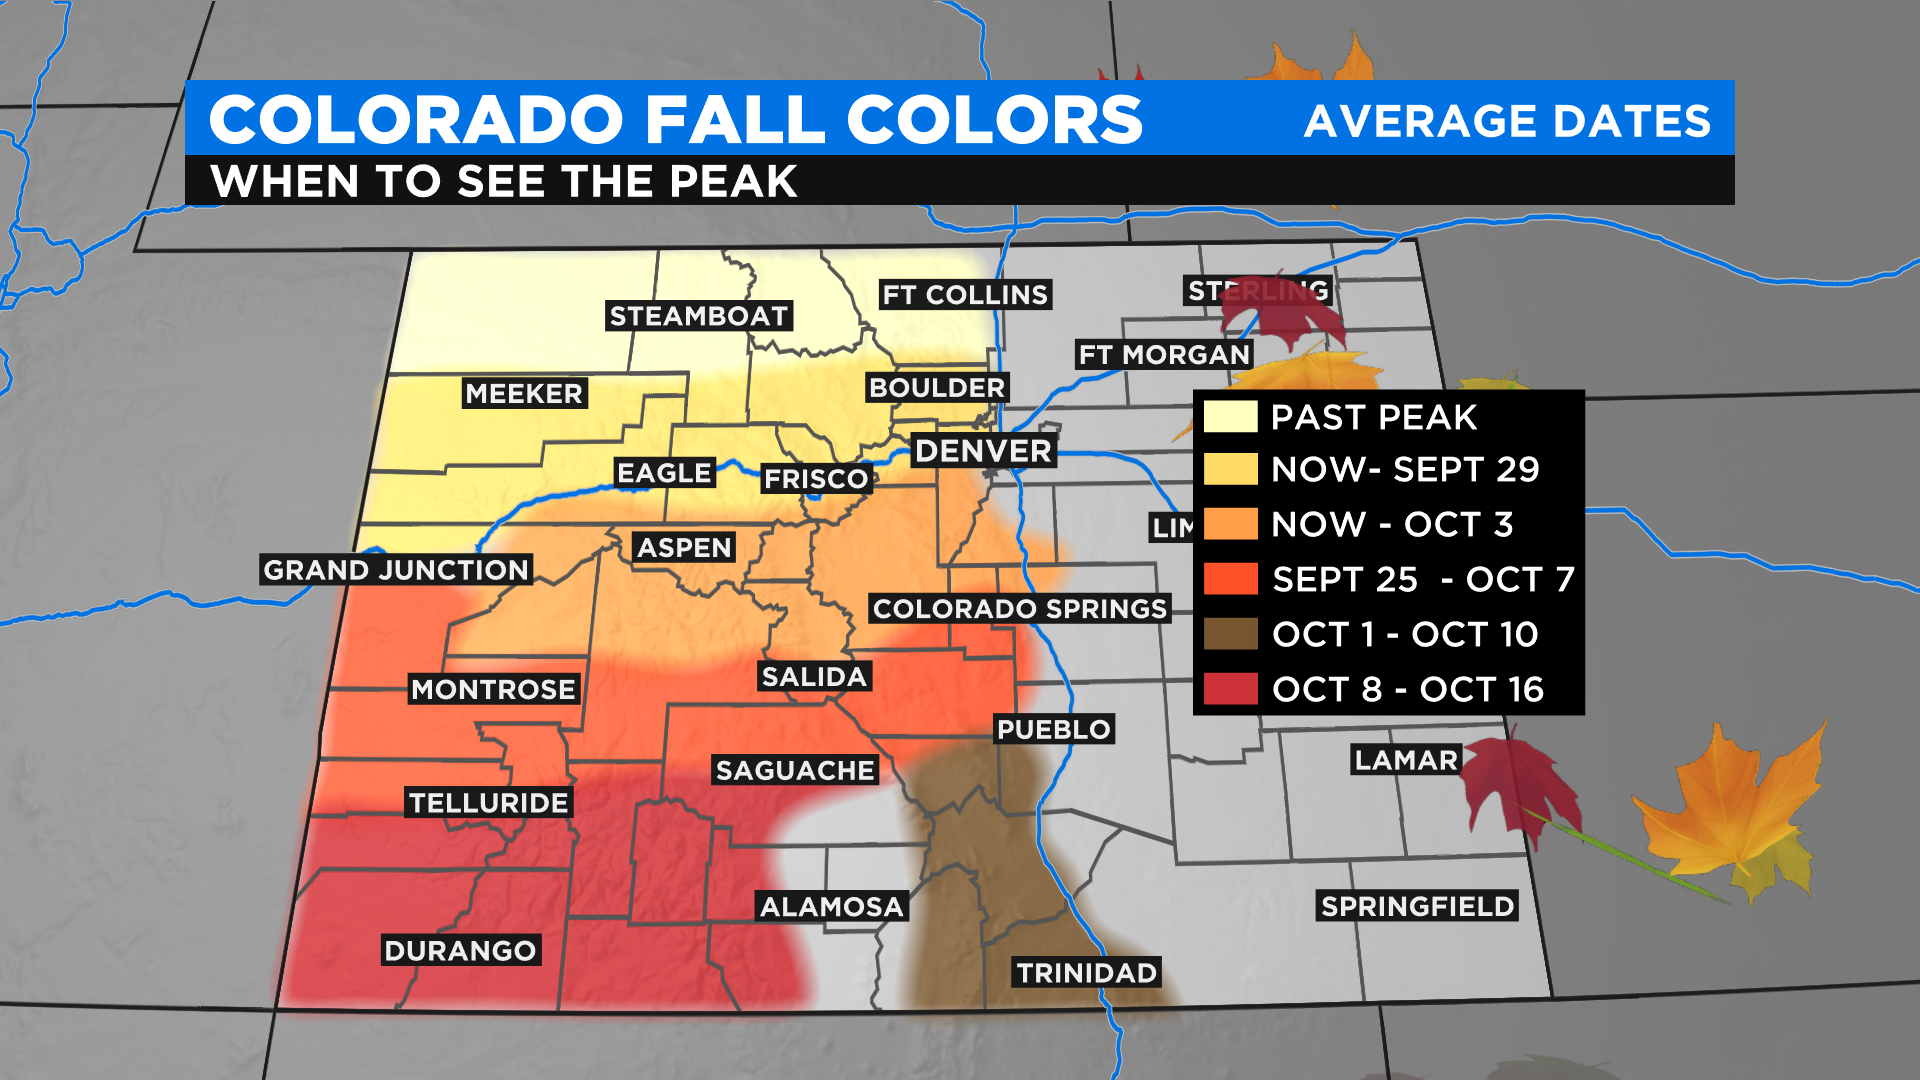 Fall Foliage Prediction Map Shows Where The Fall Colors Are The Best